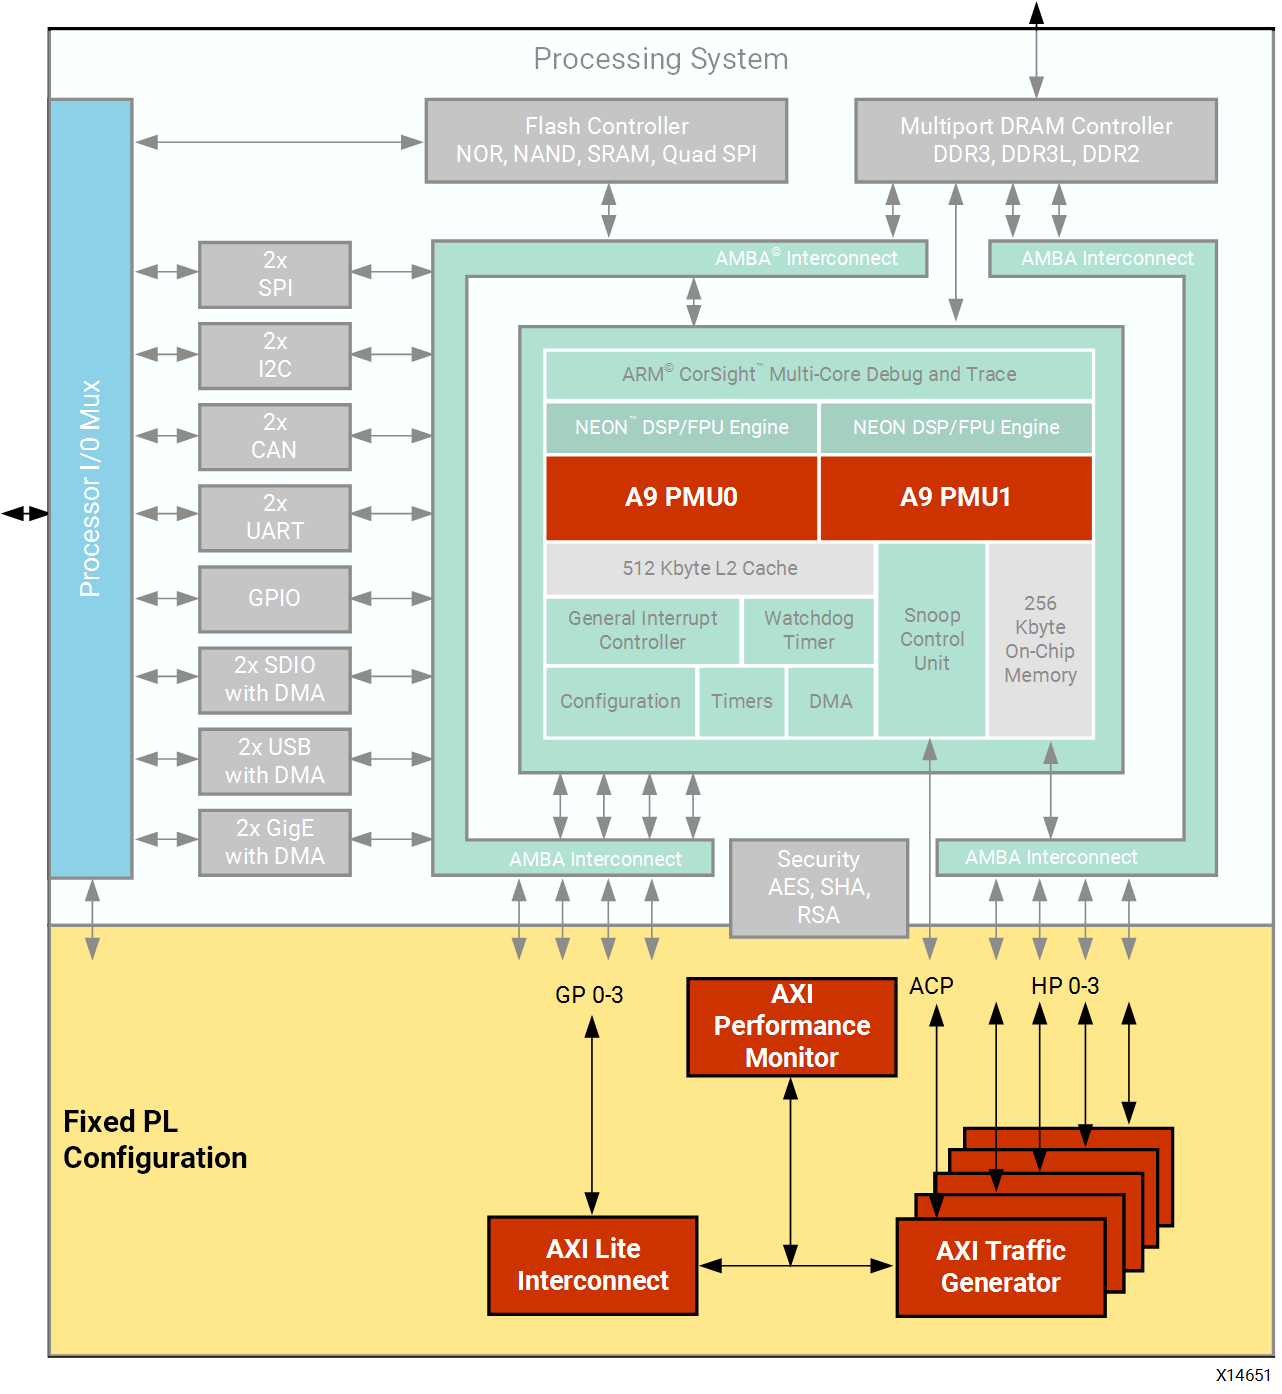 ../../../_images/x14651-Pre-Defined-SPM-Design-Zynq-7000-APSoC.png